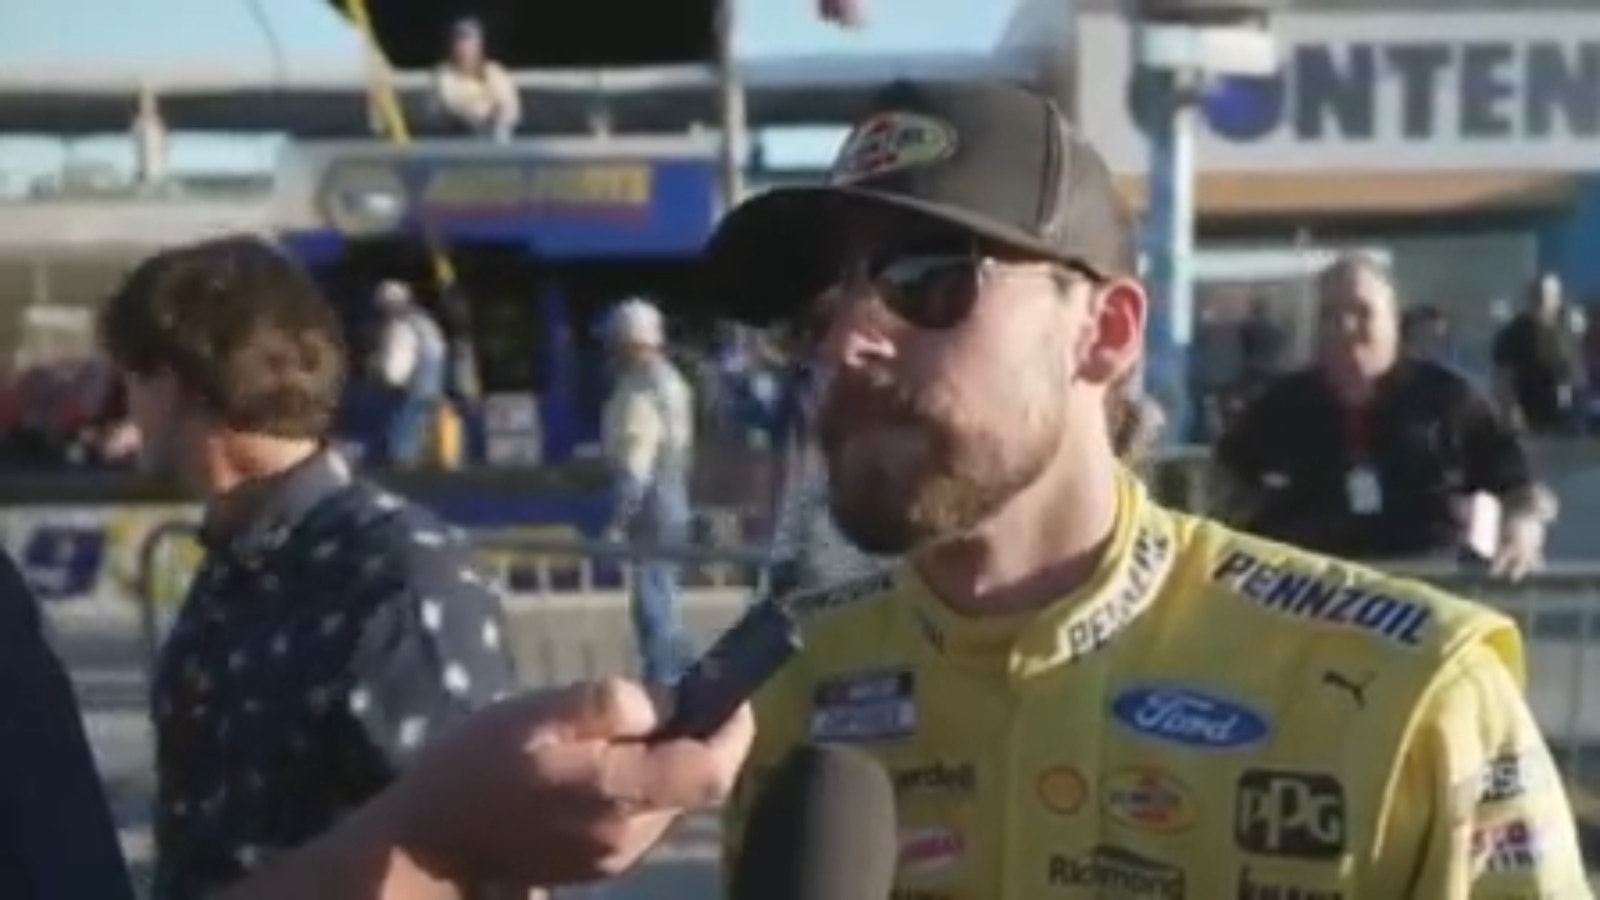 Ryan Blaney was frustrated with himself on Sunday